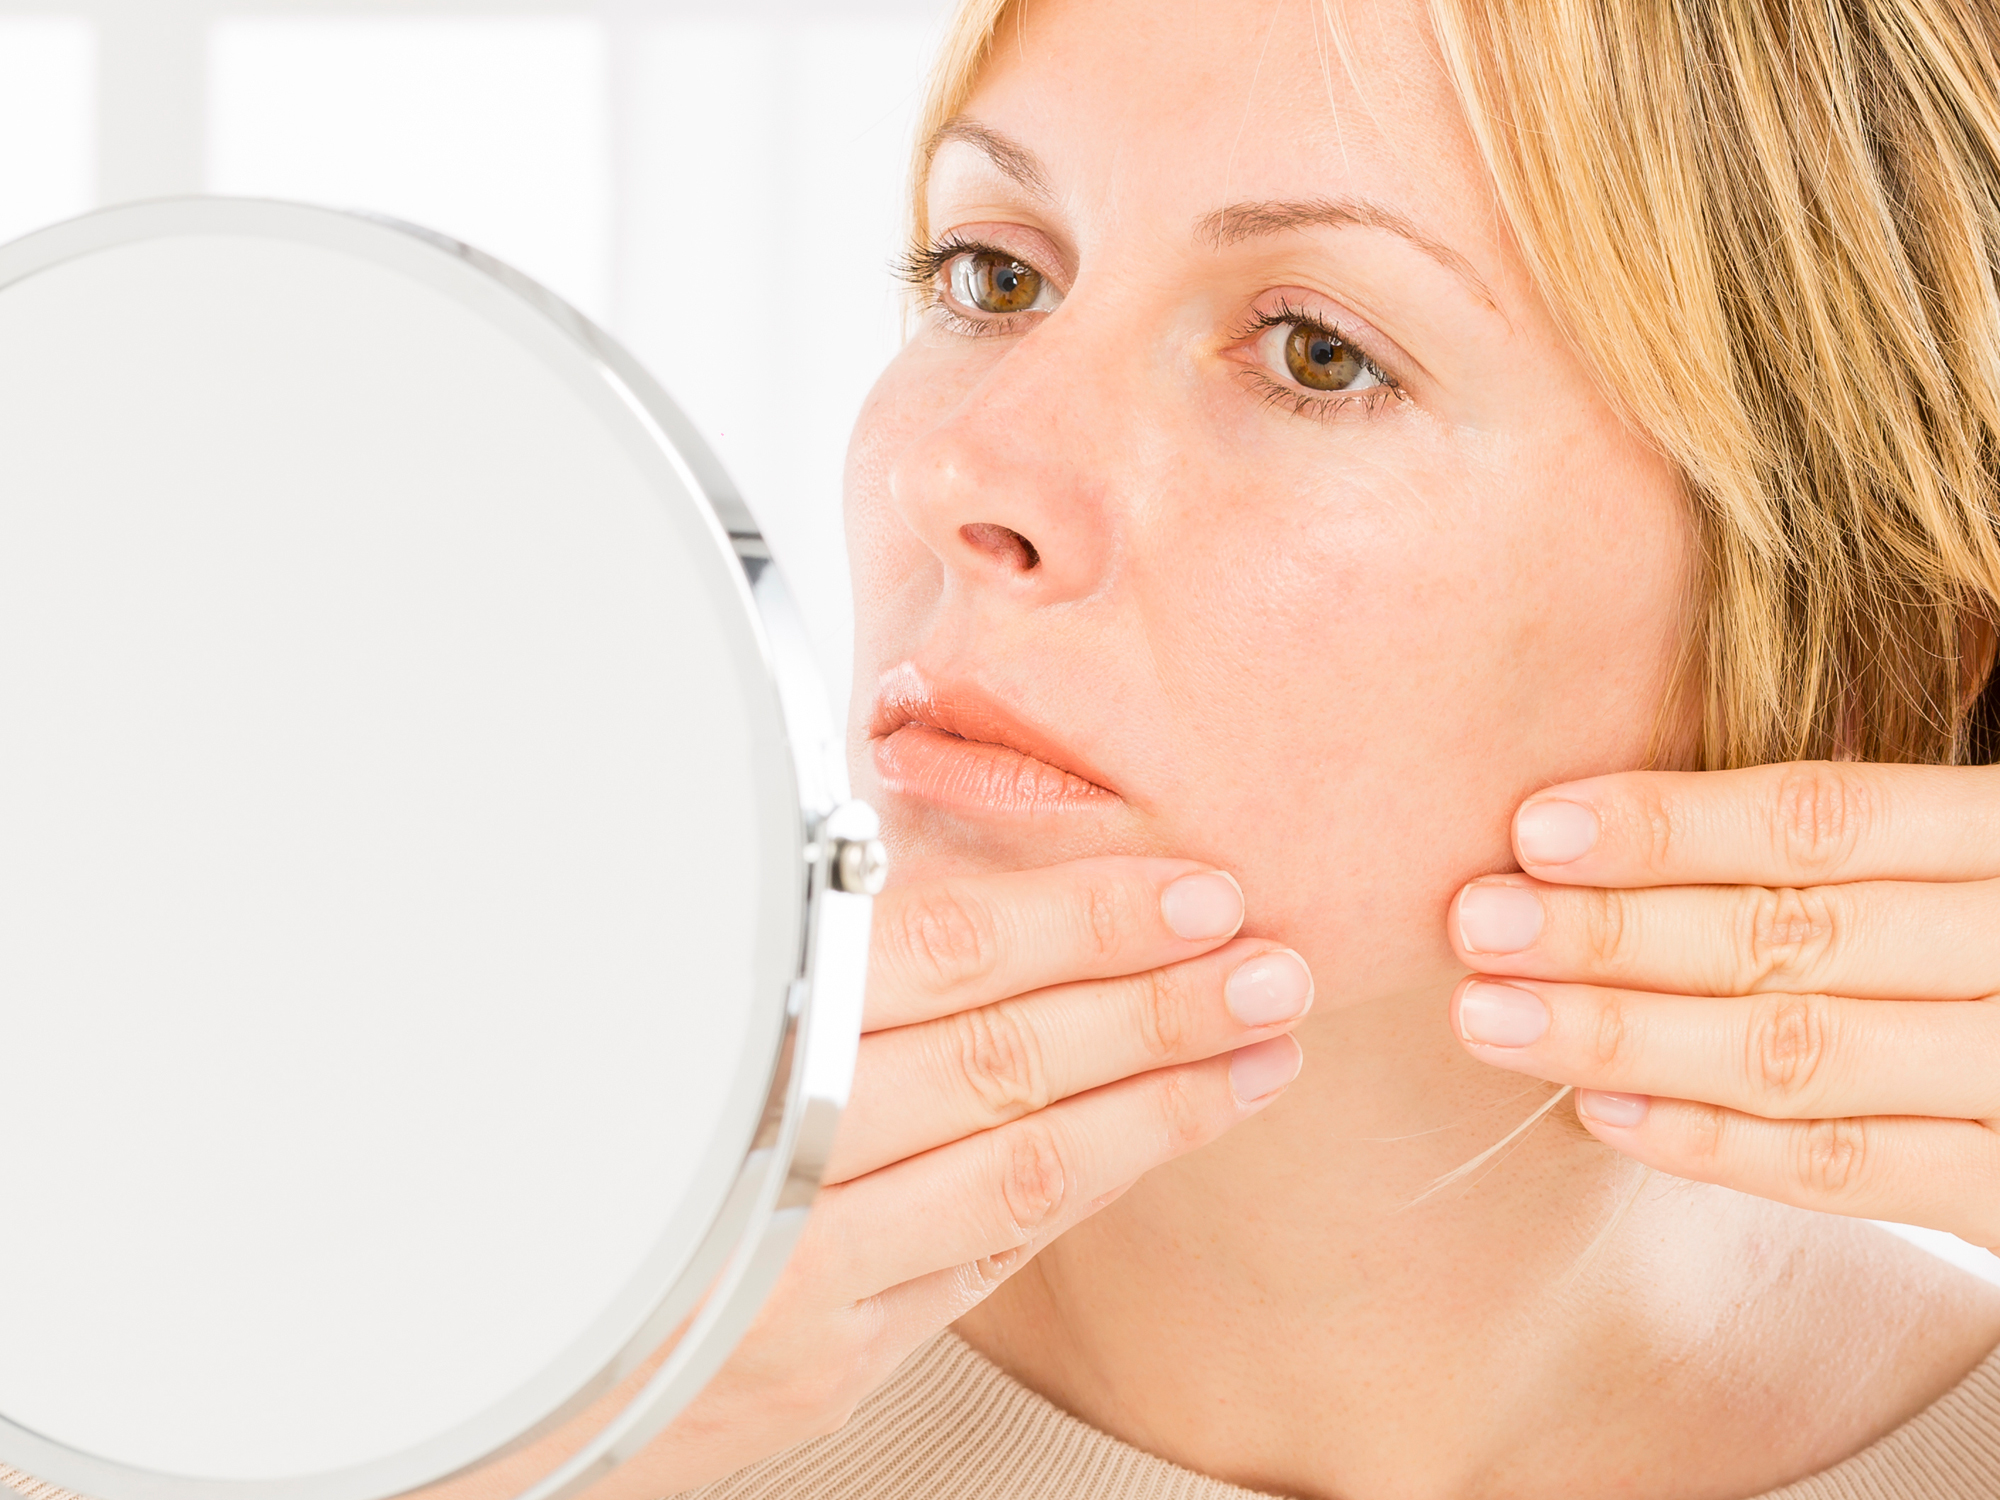 What does adult acne and chronic disease have in common?